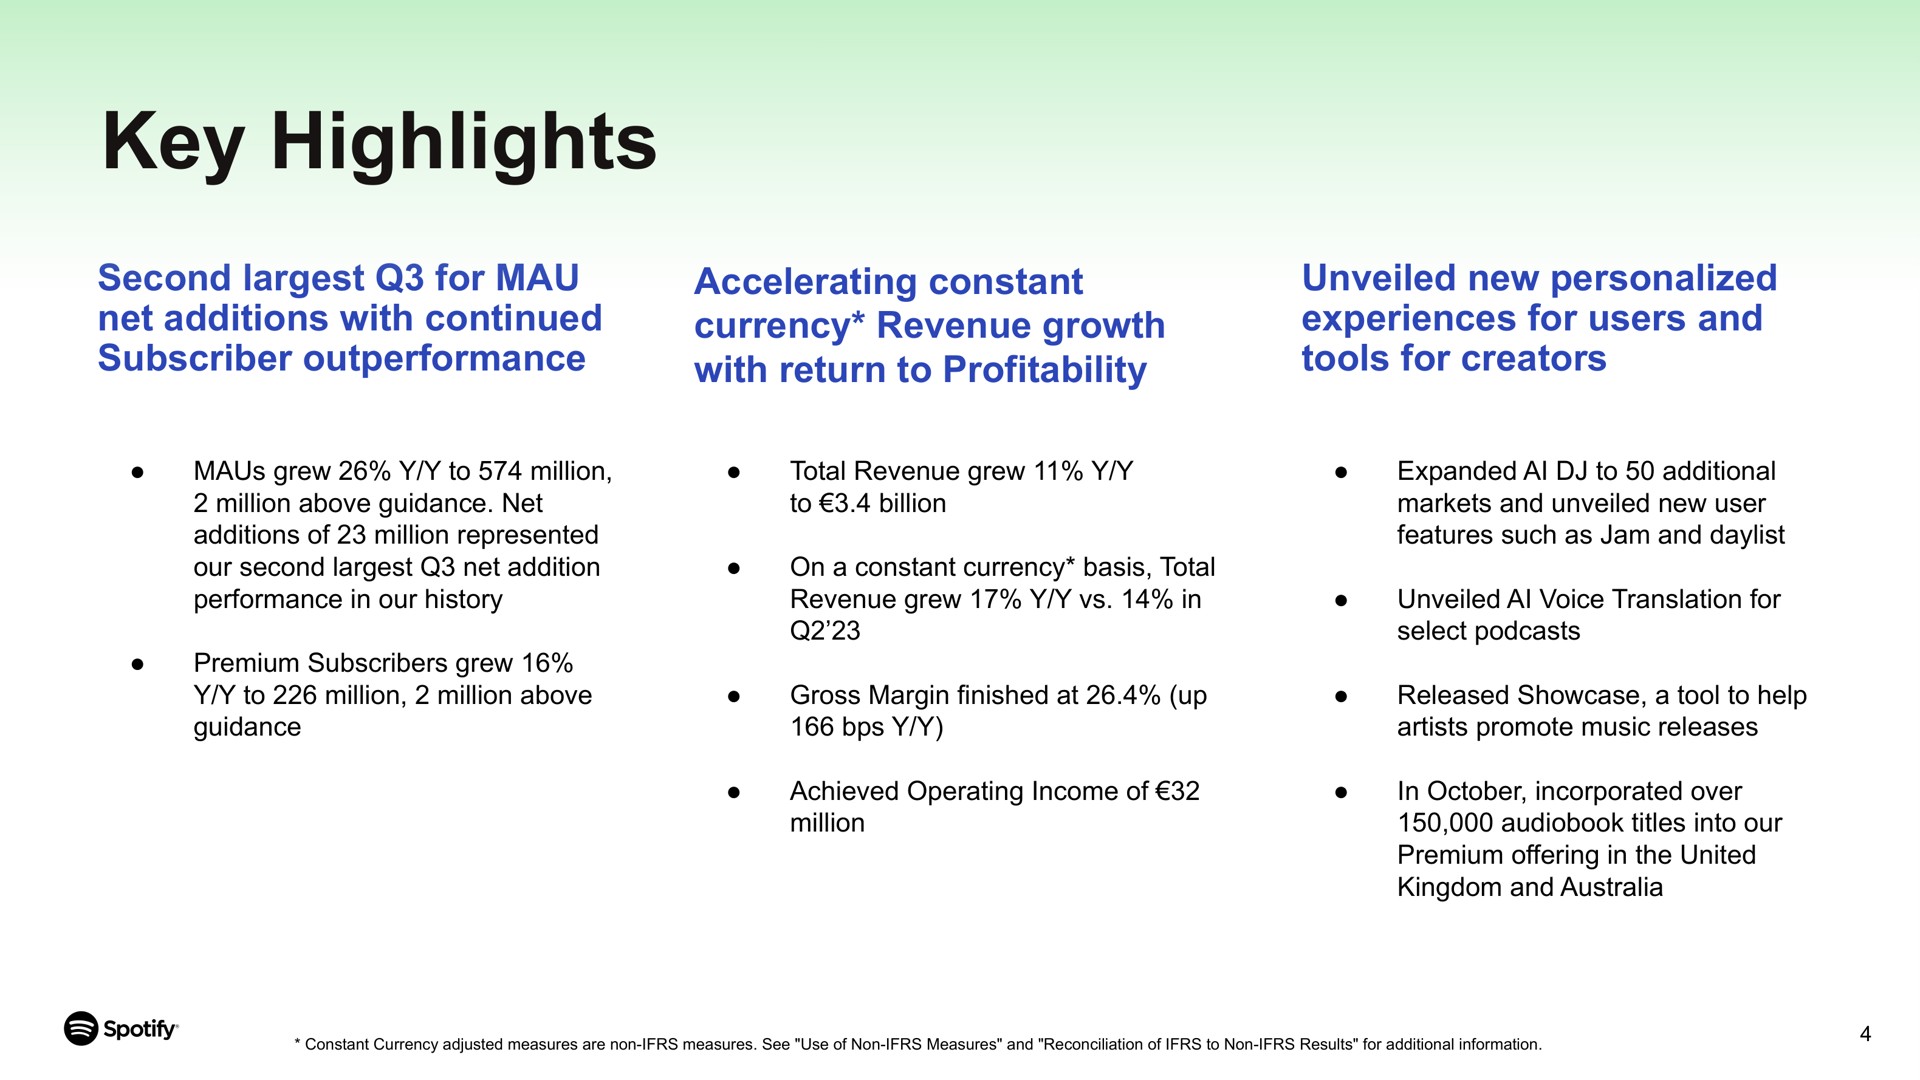 key highlights second for mau net additions with continued subscriber accelerating constant currency revenue growth with return to profitability unveiled new personalized experiences for users and tools for creators | Spotify